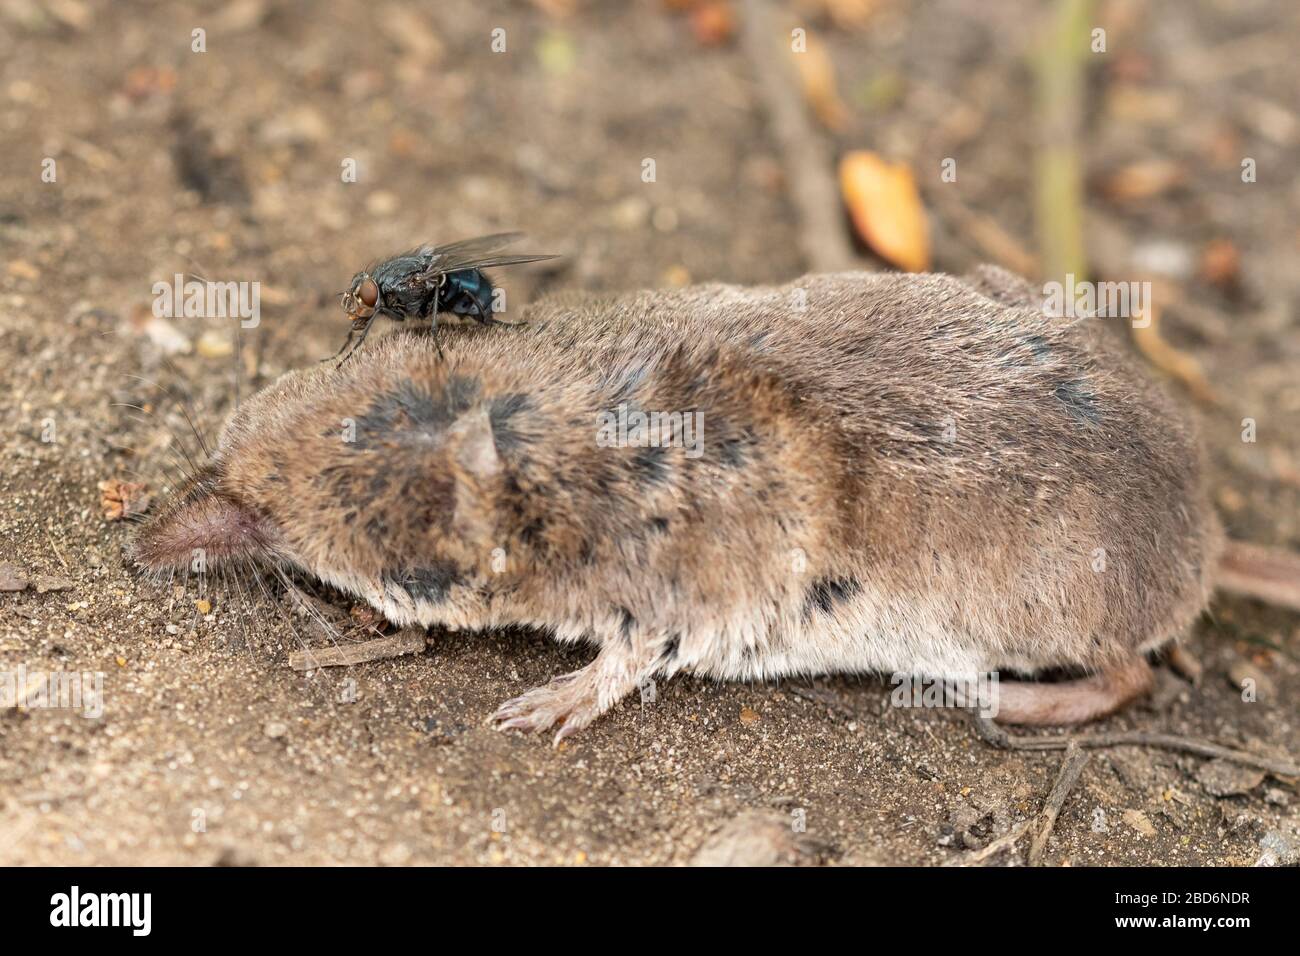 A blow fly on the corpse of a shrew, dead small mammal, UK Stock Photo